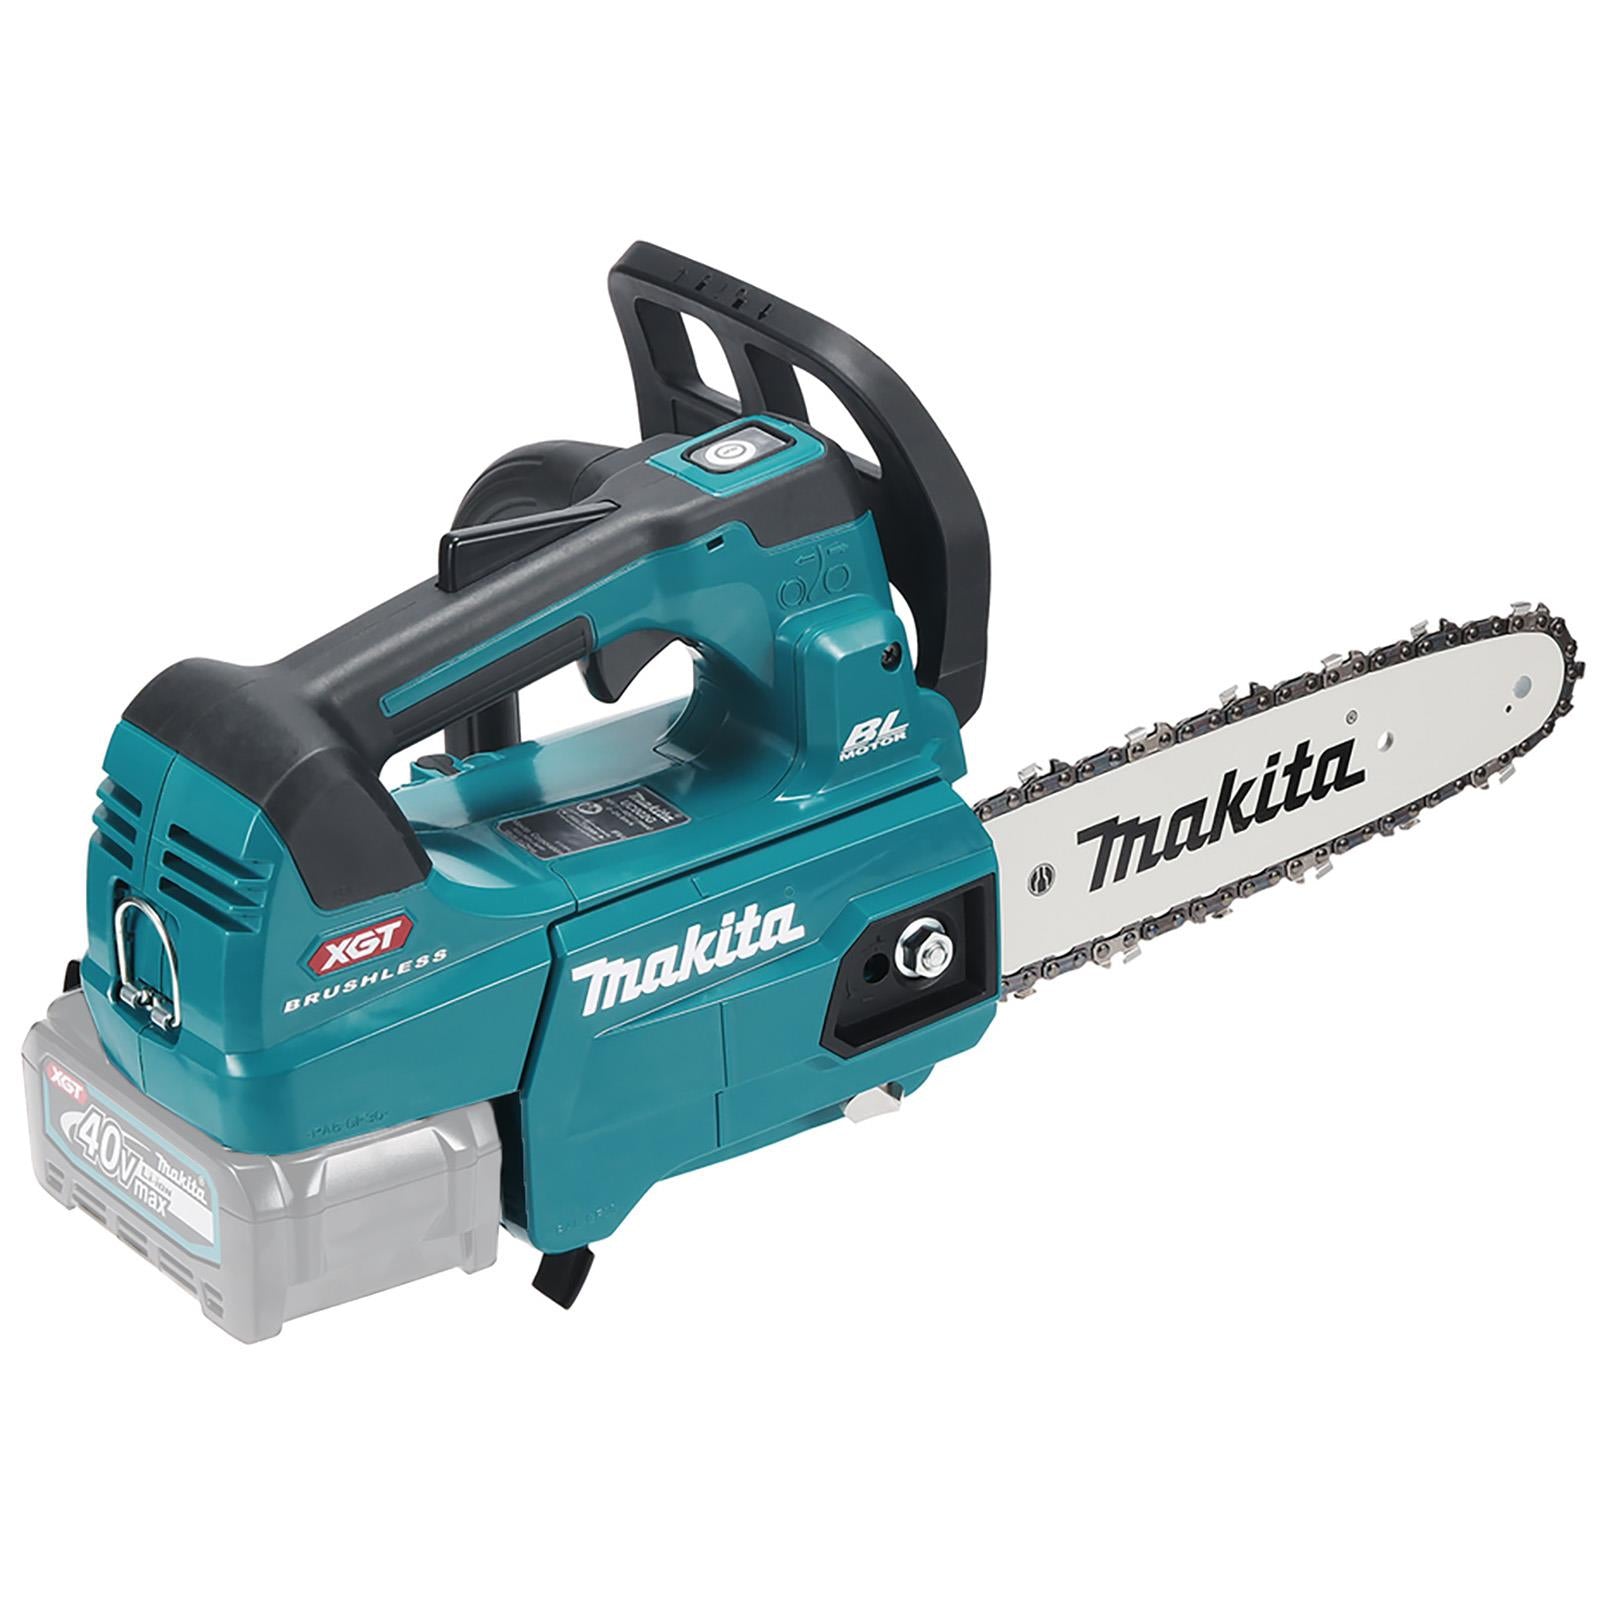 Makita Chainsaw 25cm 10" 40V XGT Brushless Cordless Top Handle Garden Tree Cutting Pruning Bare Unit Body Only UC002GZ